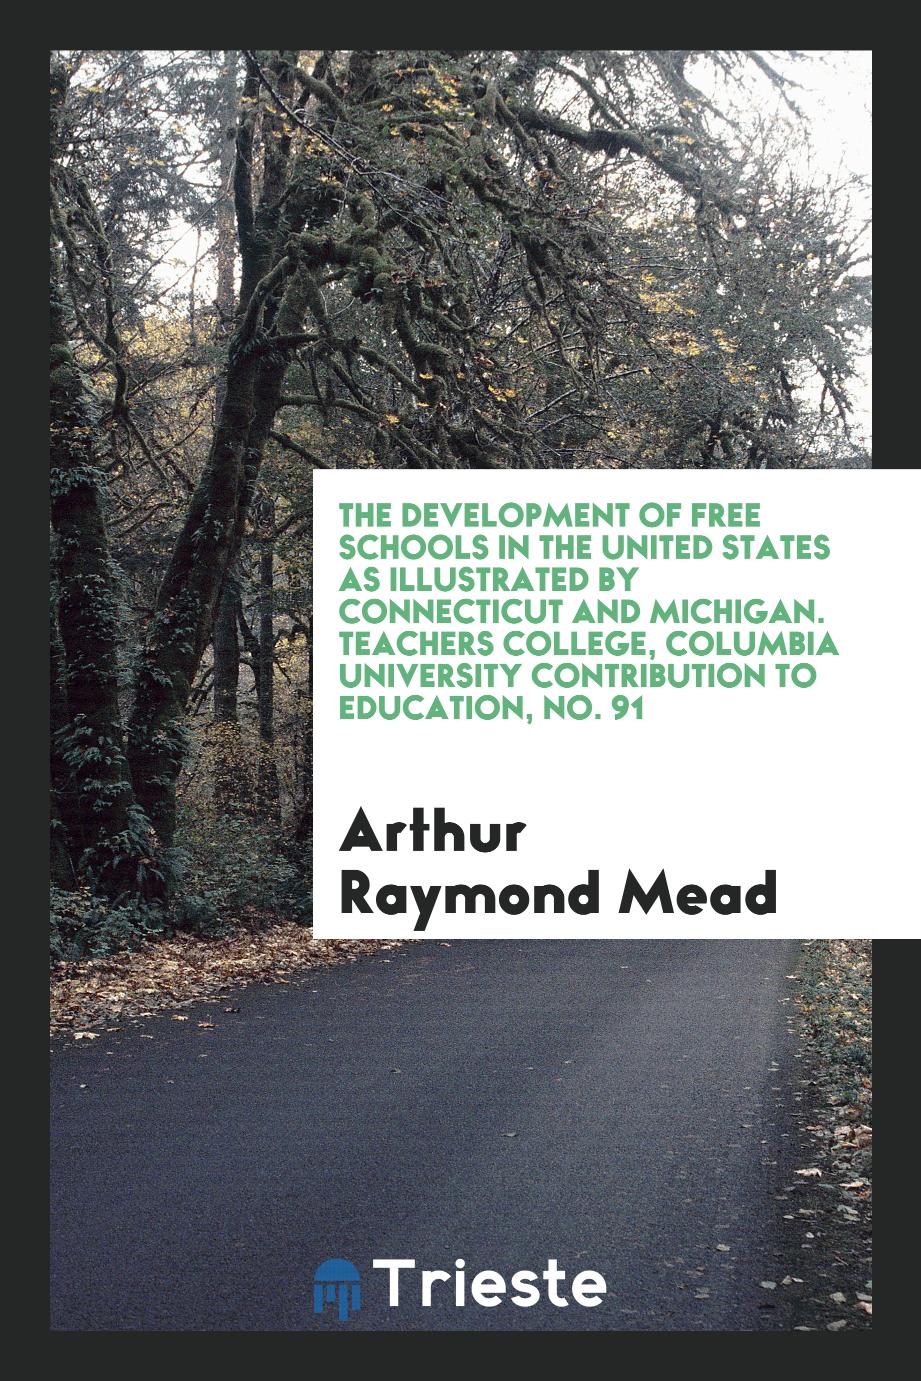 Arthur Raymond Mead - The Development of Free Schools in the United States as Illustrated by Connecticut and Michigan. Teachers College, Columbia University Contribution to Education, No. 91